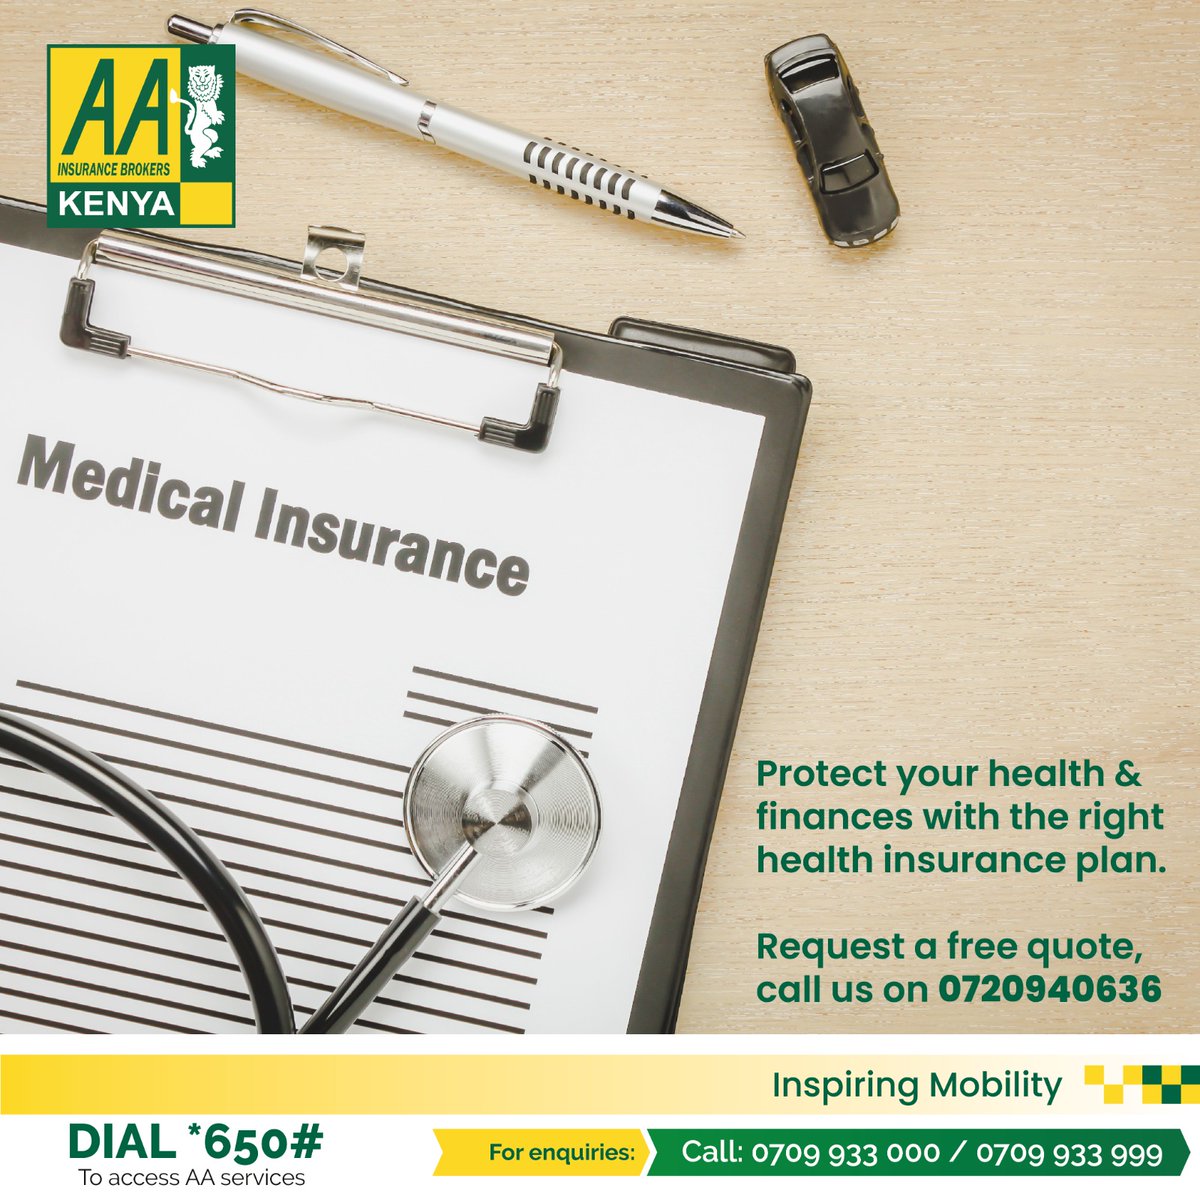 Protect your health and finances with the right health insurance plan. Request a free quote from AA Insurance Brokers, call us on 0720940636/0709933000
#AAIBCares